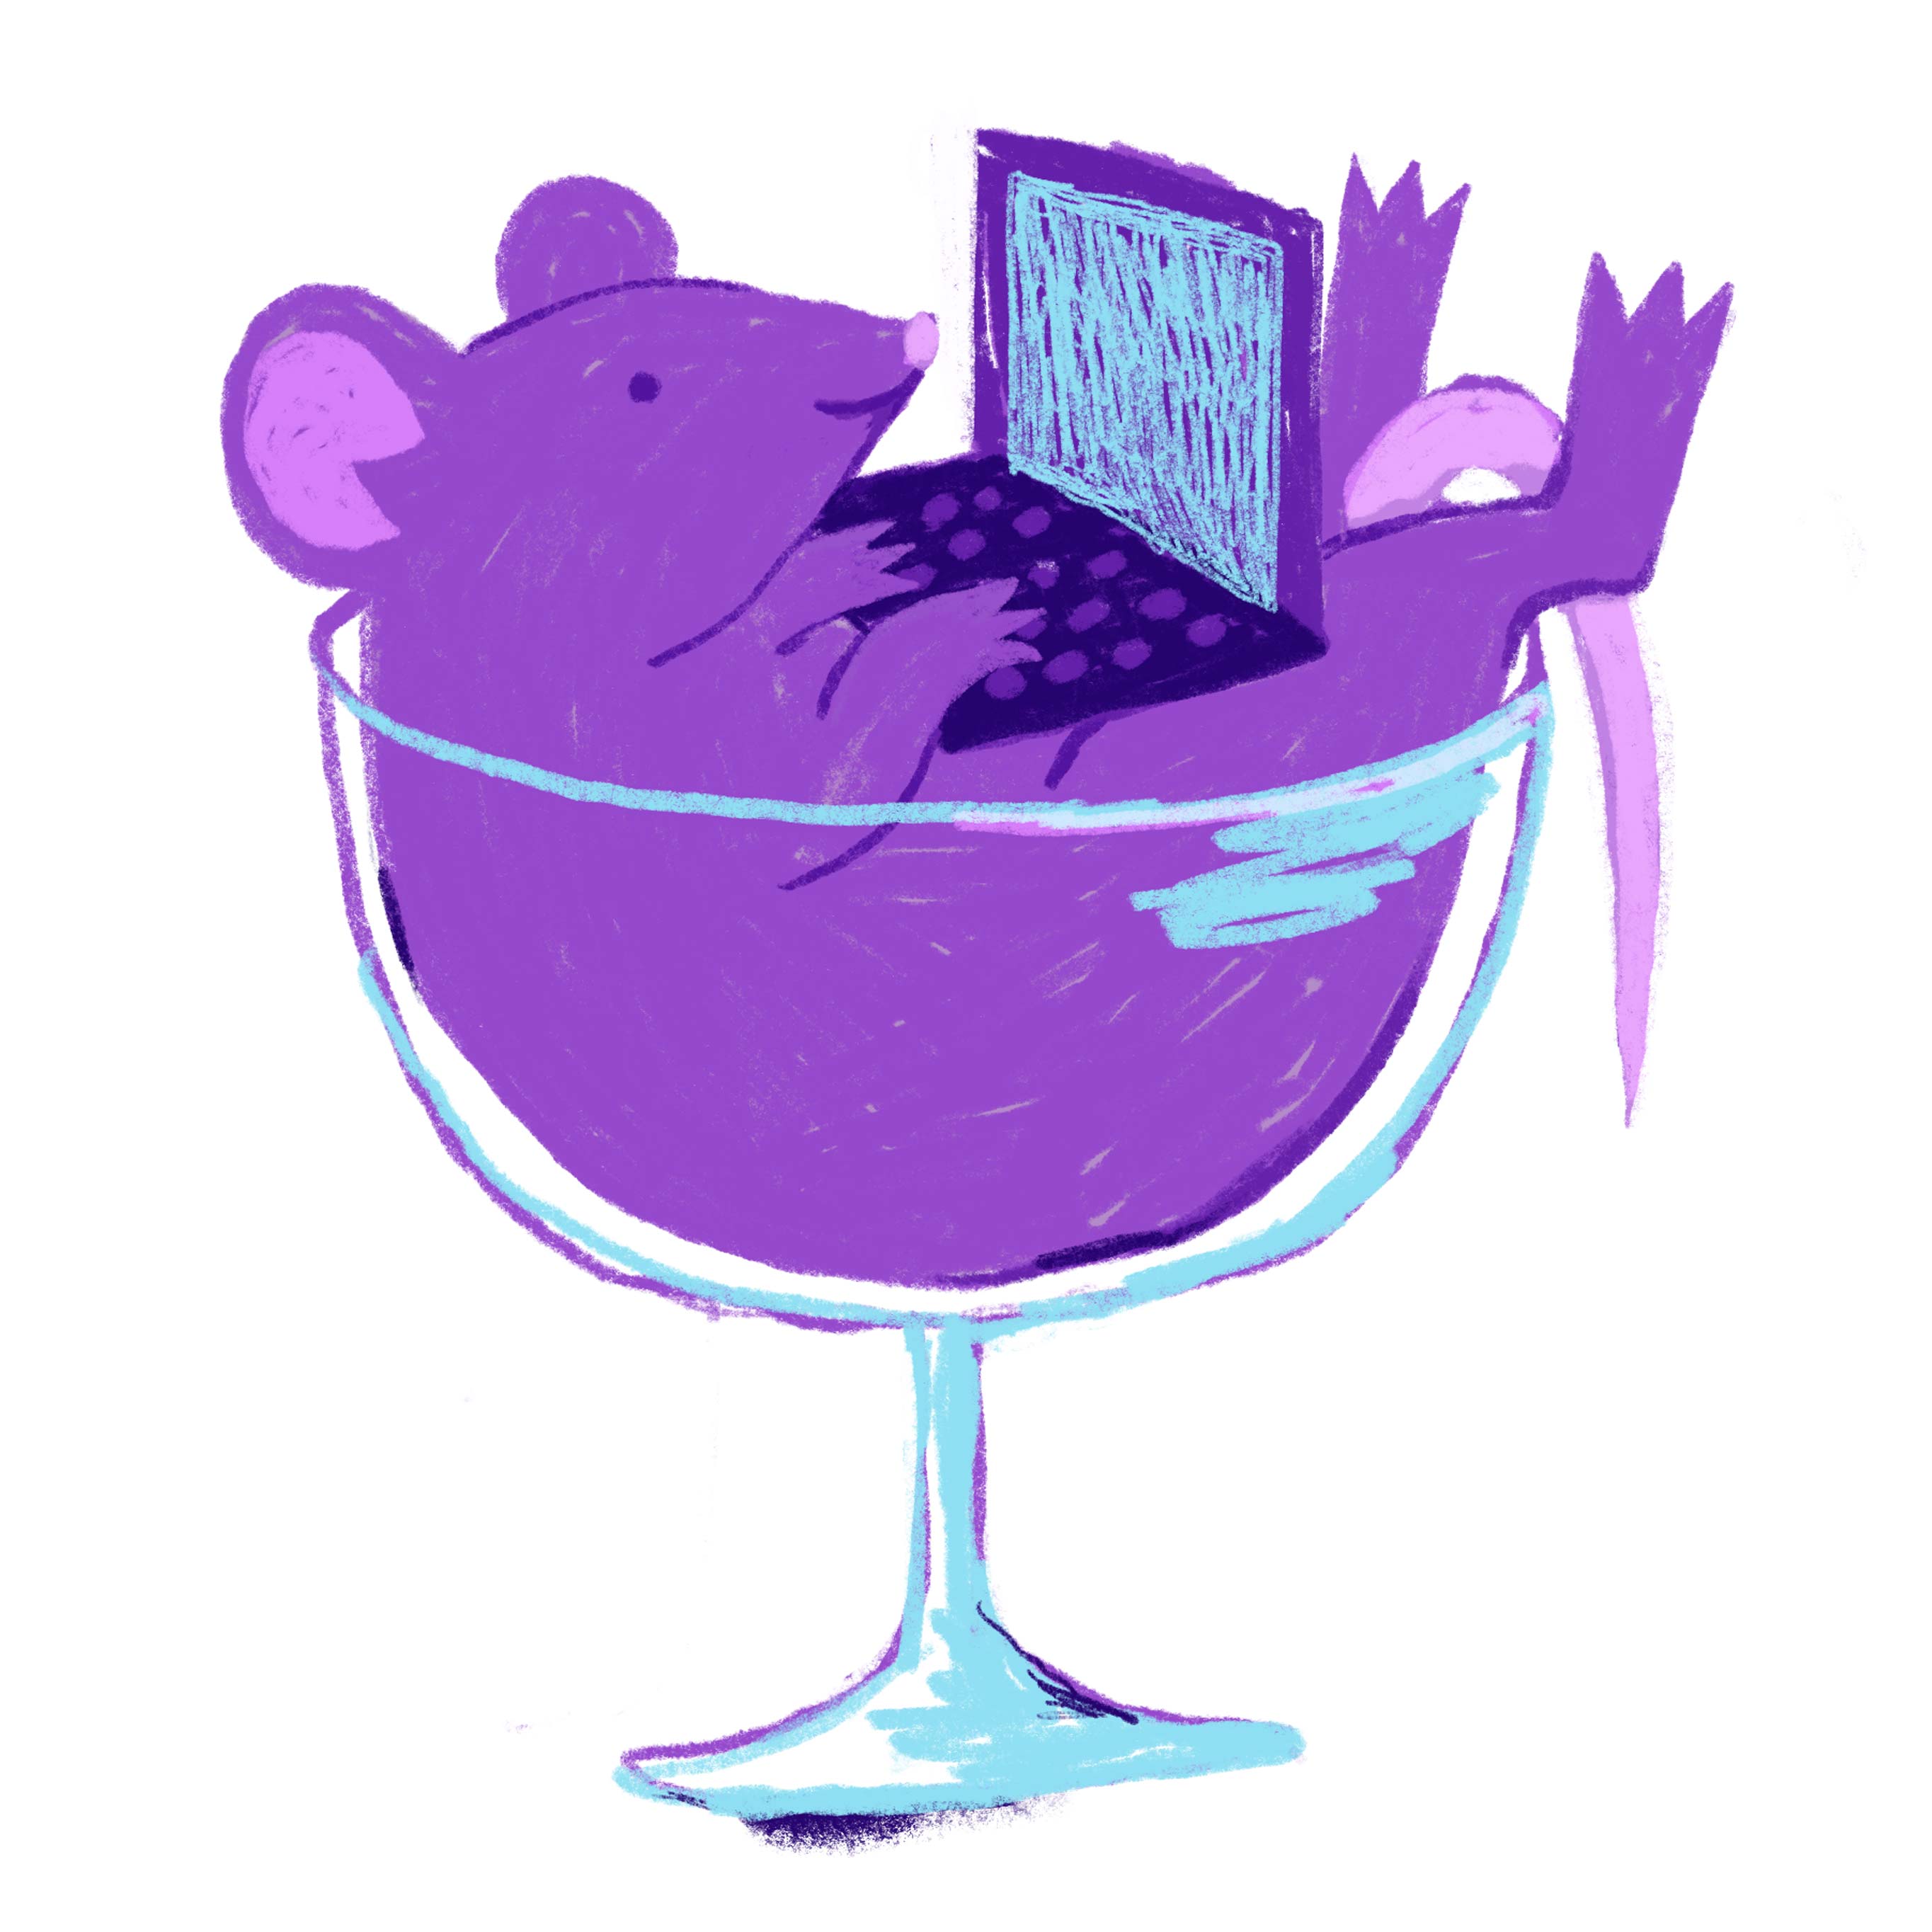 A purple rat types on a laptop in a wine glass.